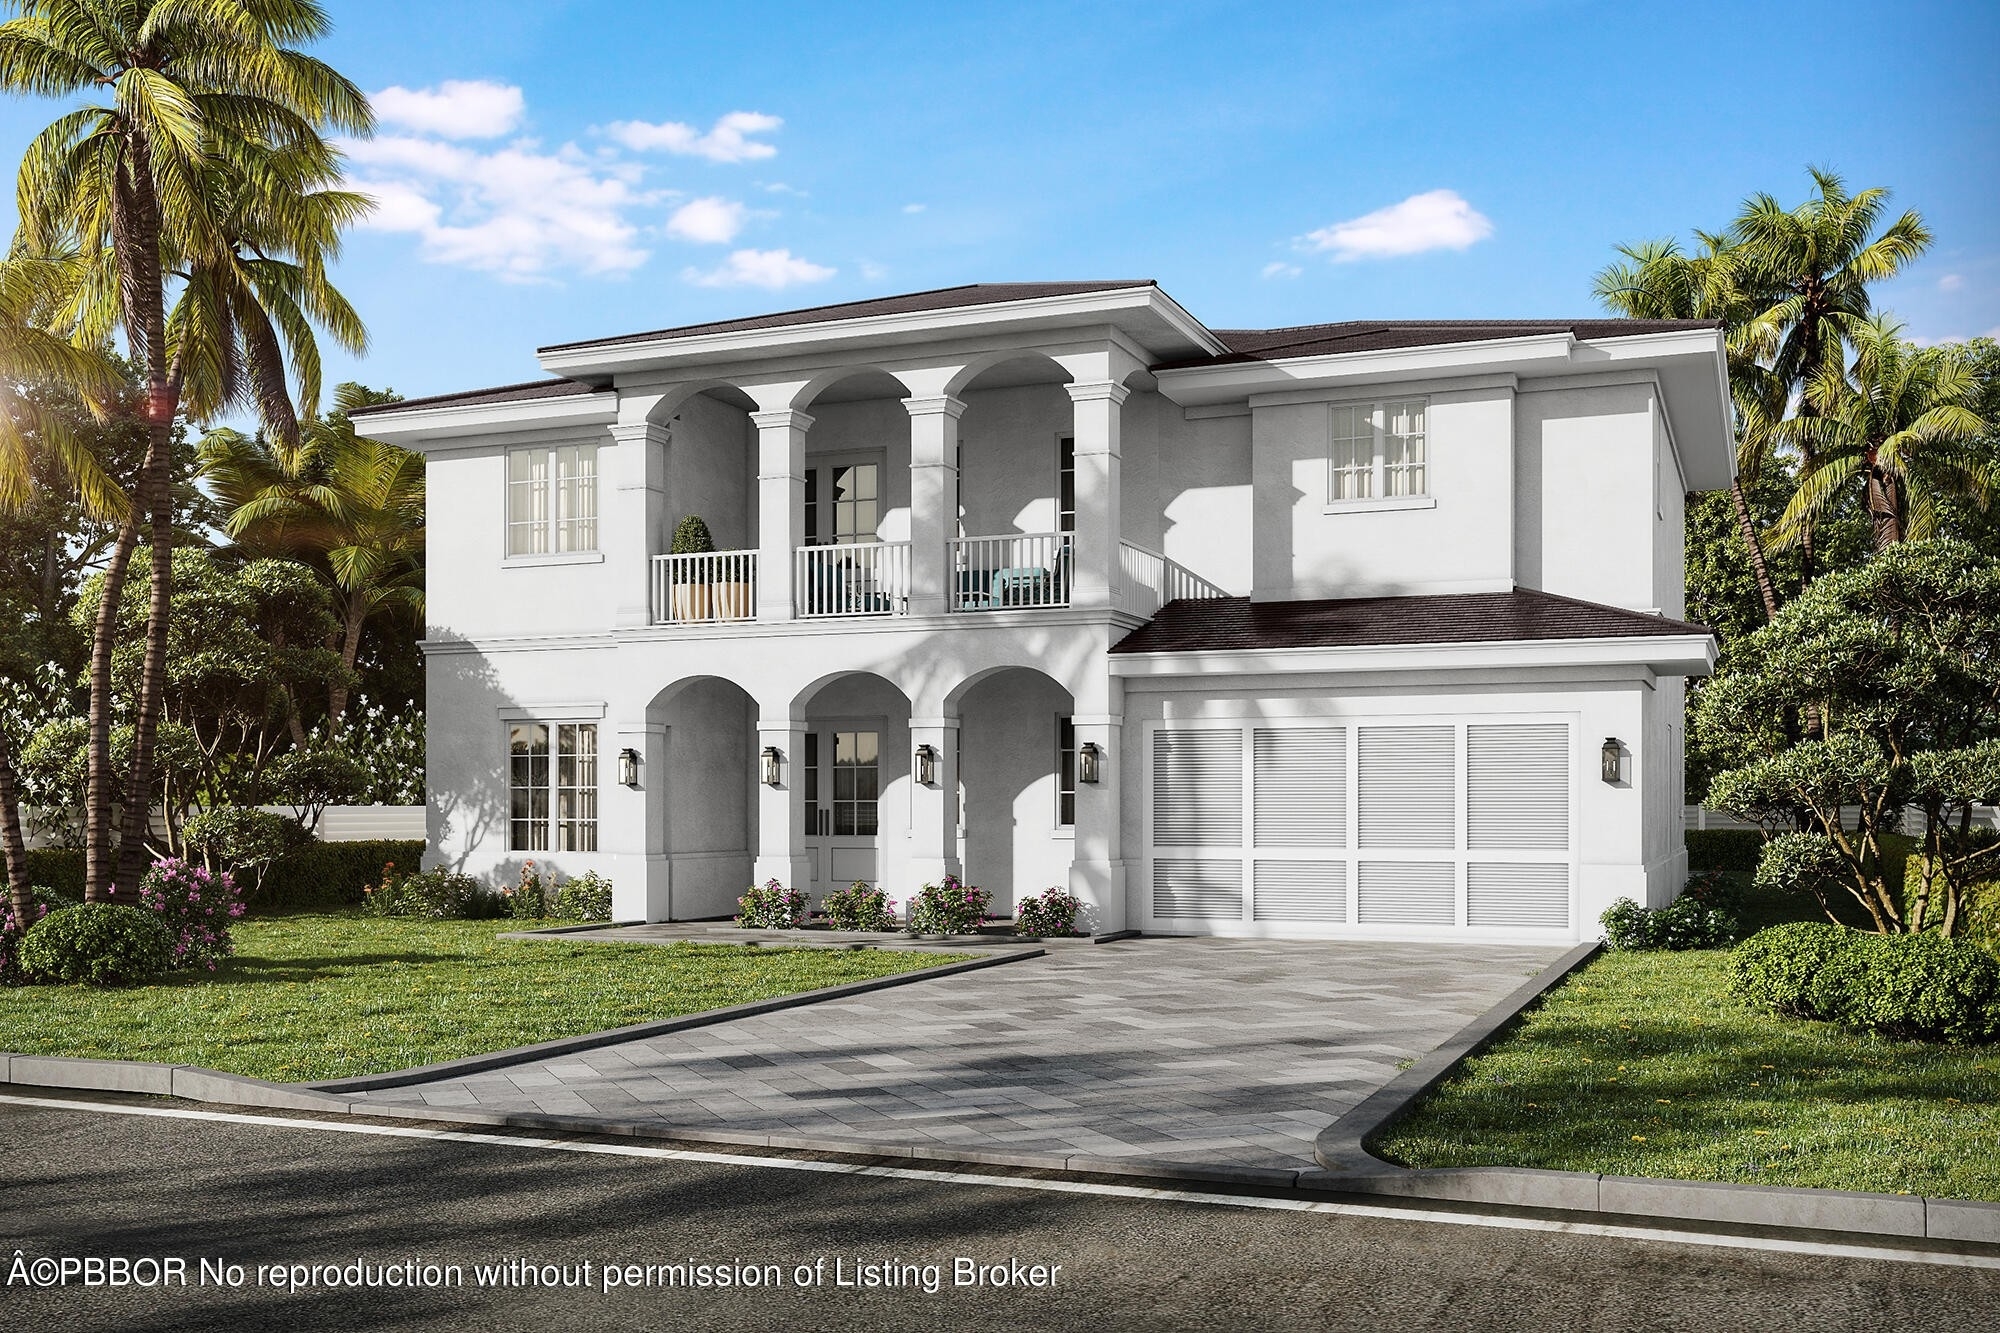 Single Family Home for Sale at South End, West Palm Beach, Florida 33405